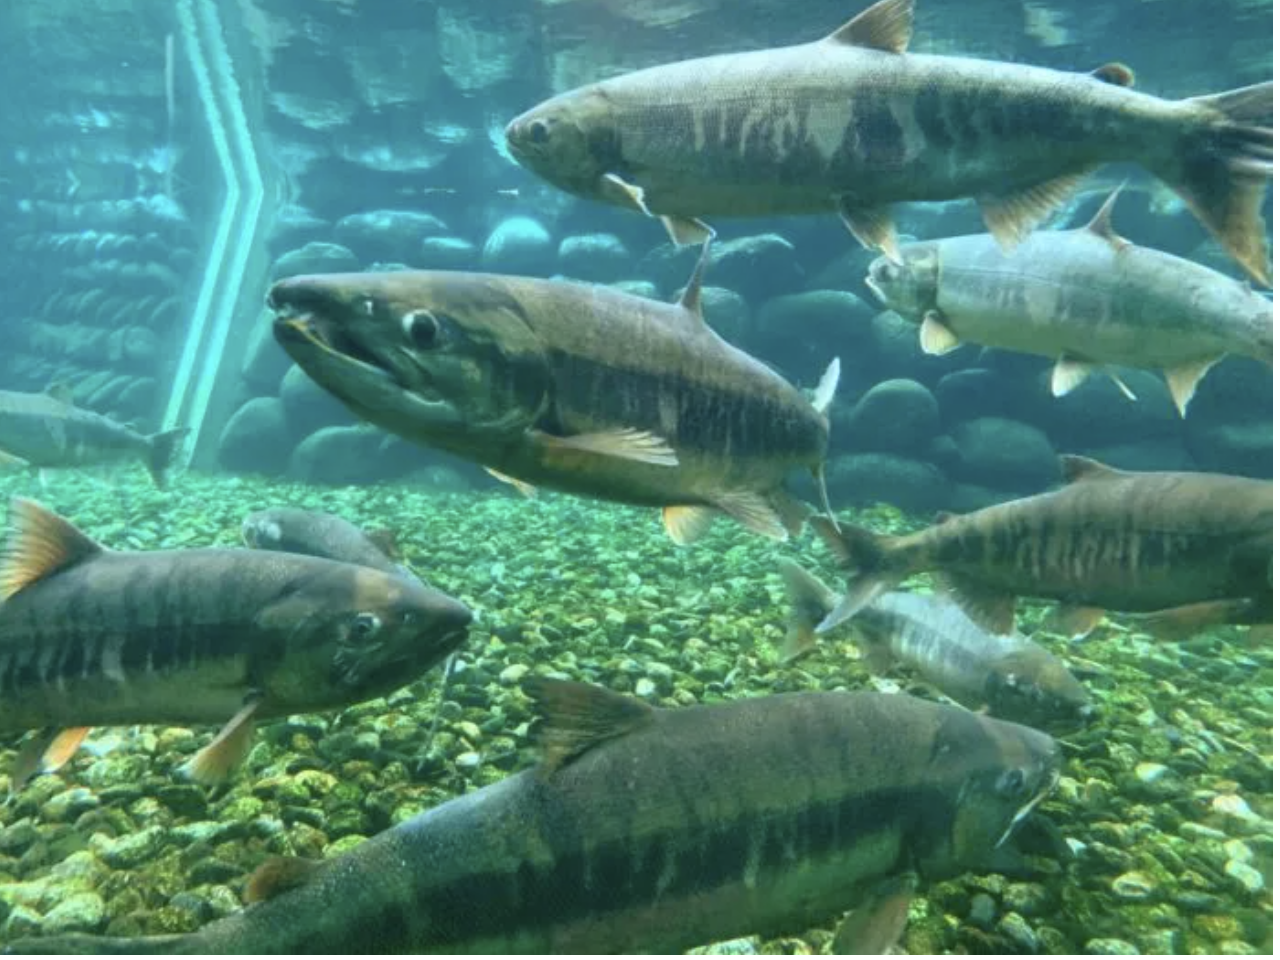 Japanese museum dedicated to salmon has no live salmon on display this year